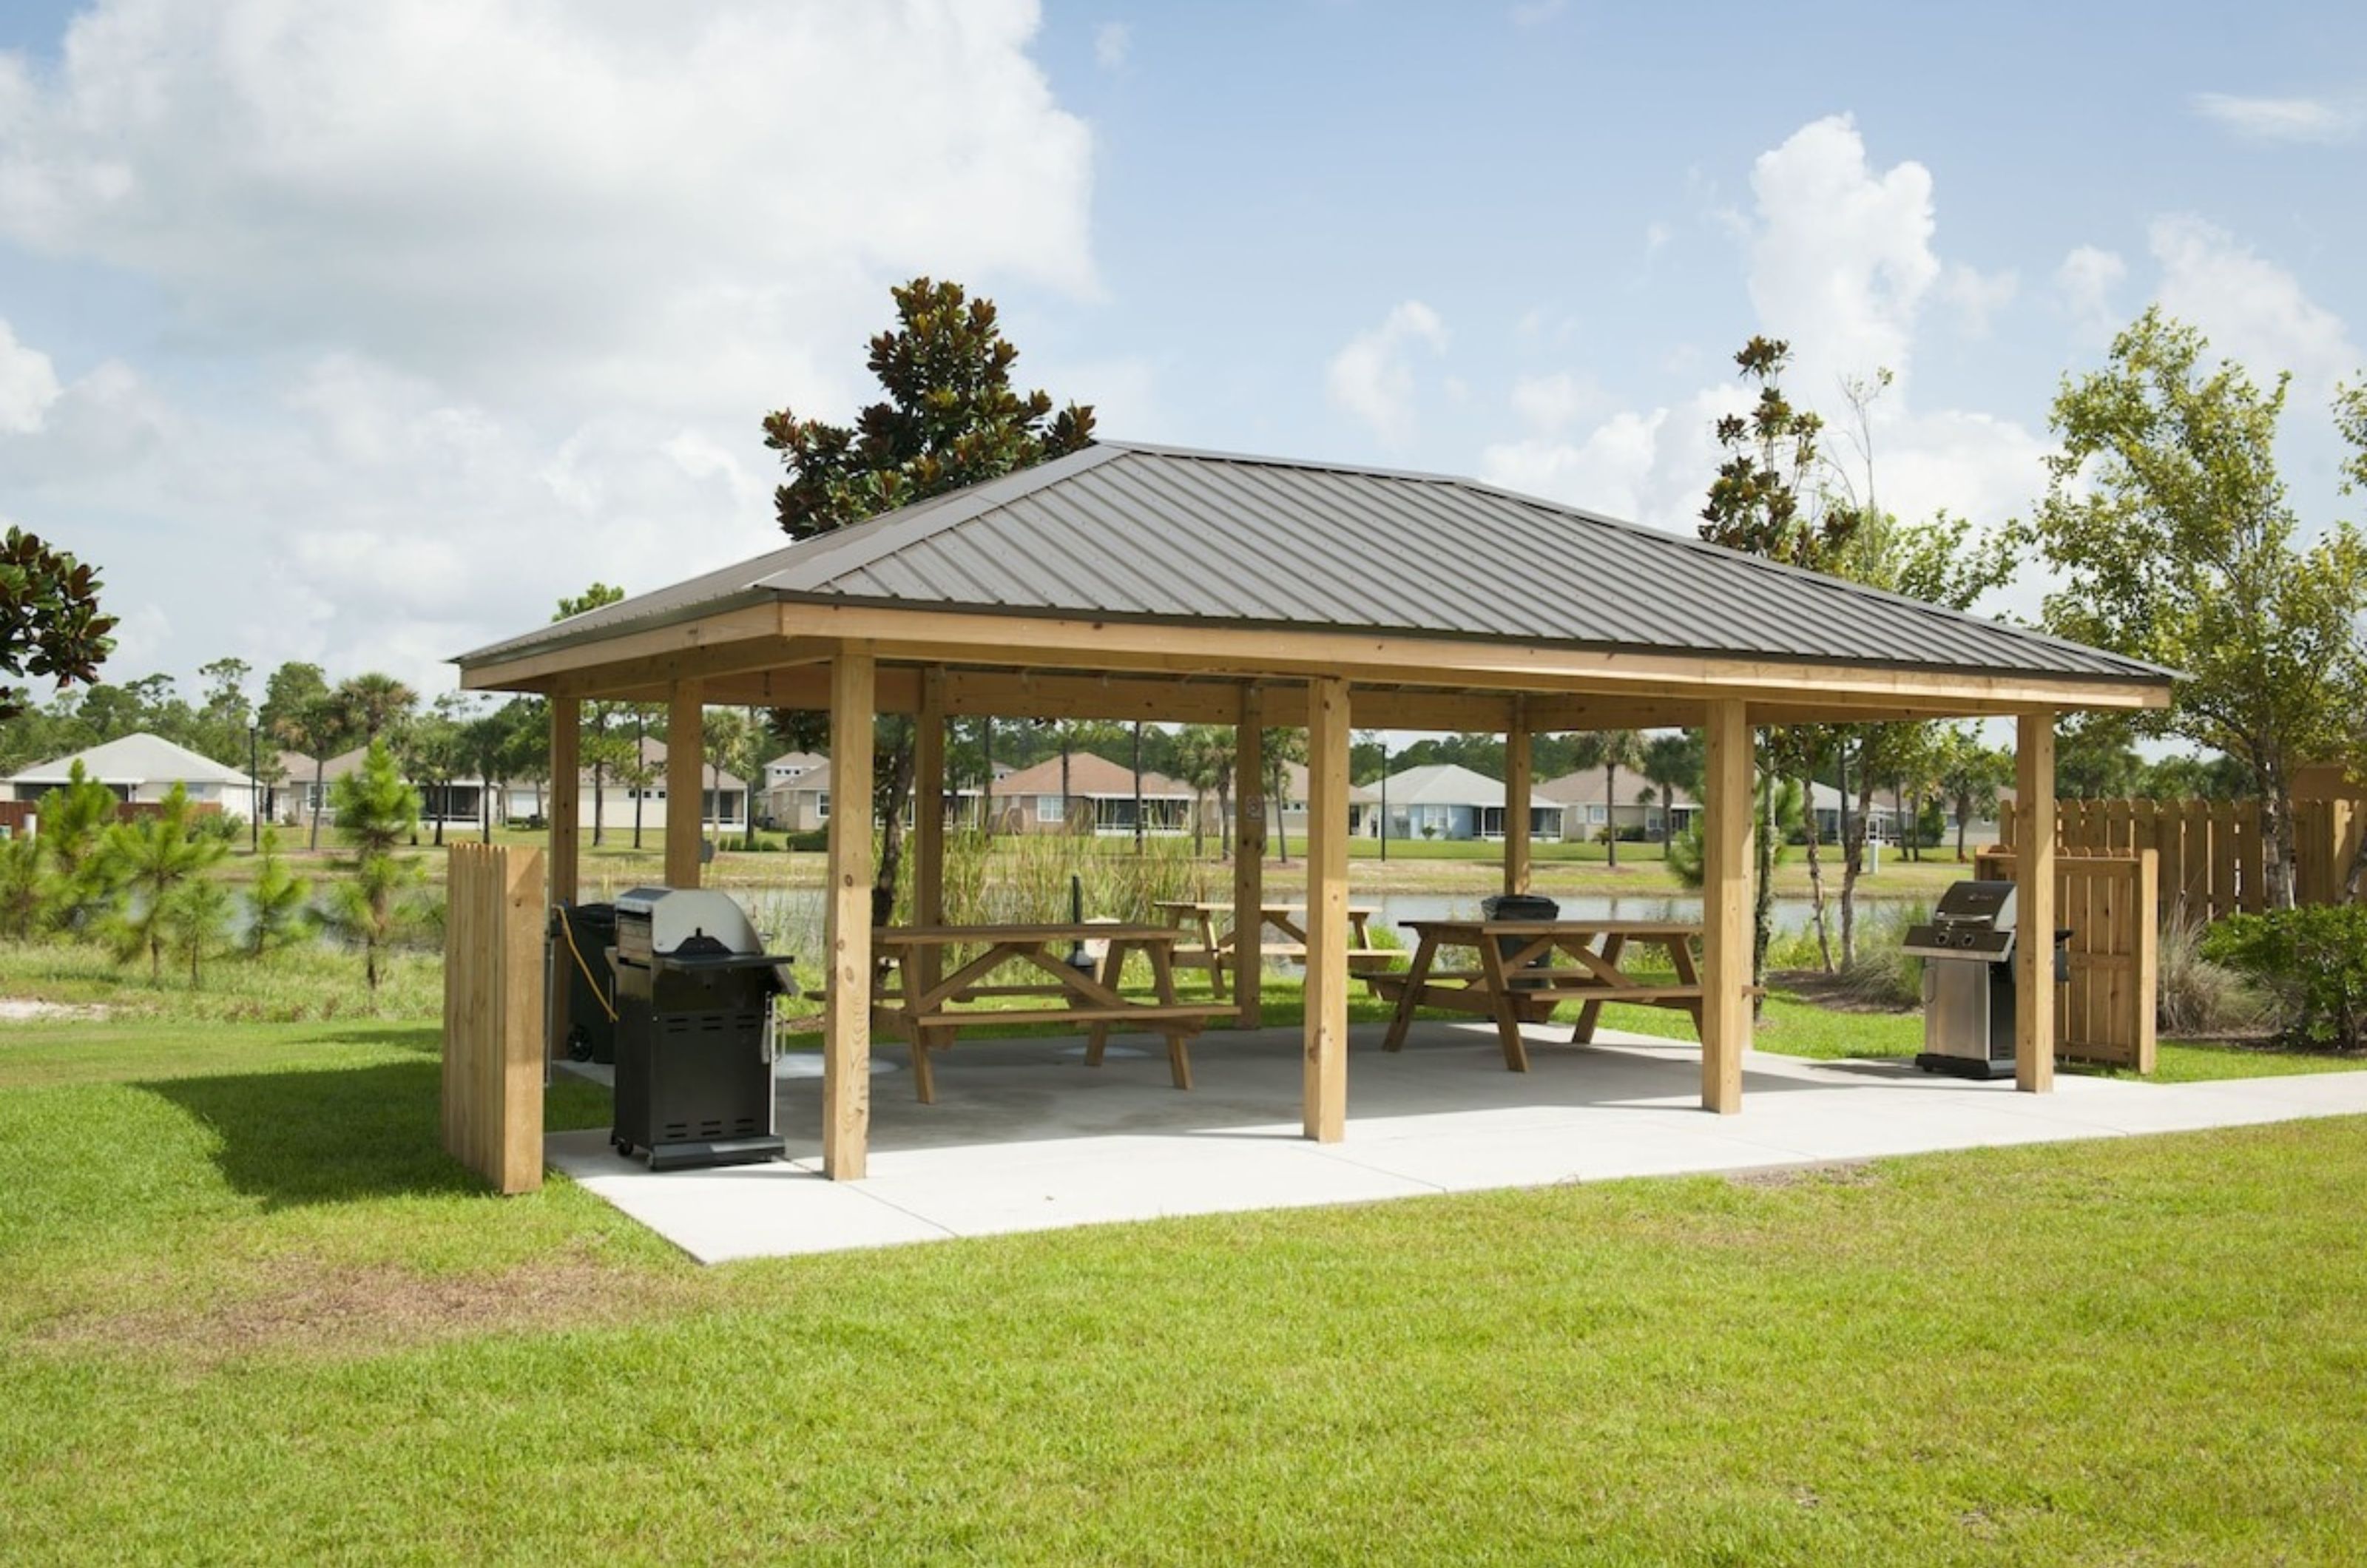 A covered outdoor patio with picnic tables nad barbecue grills 